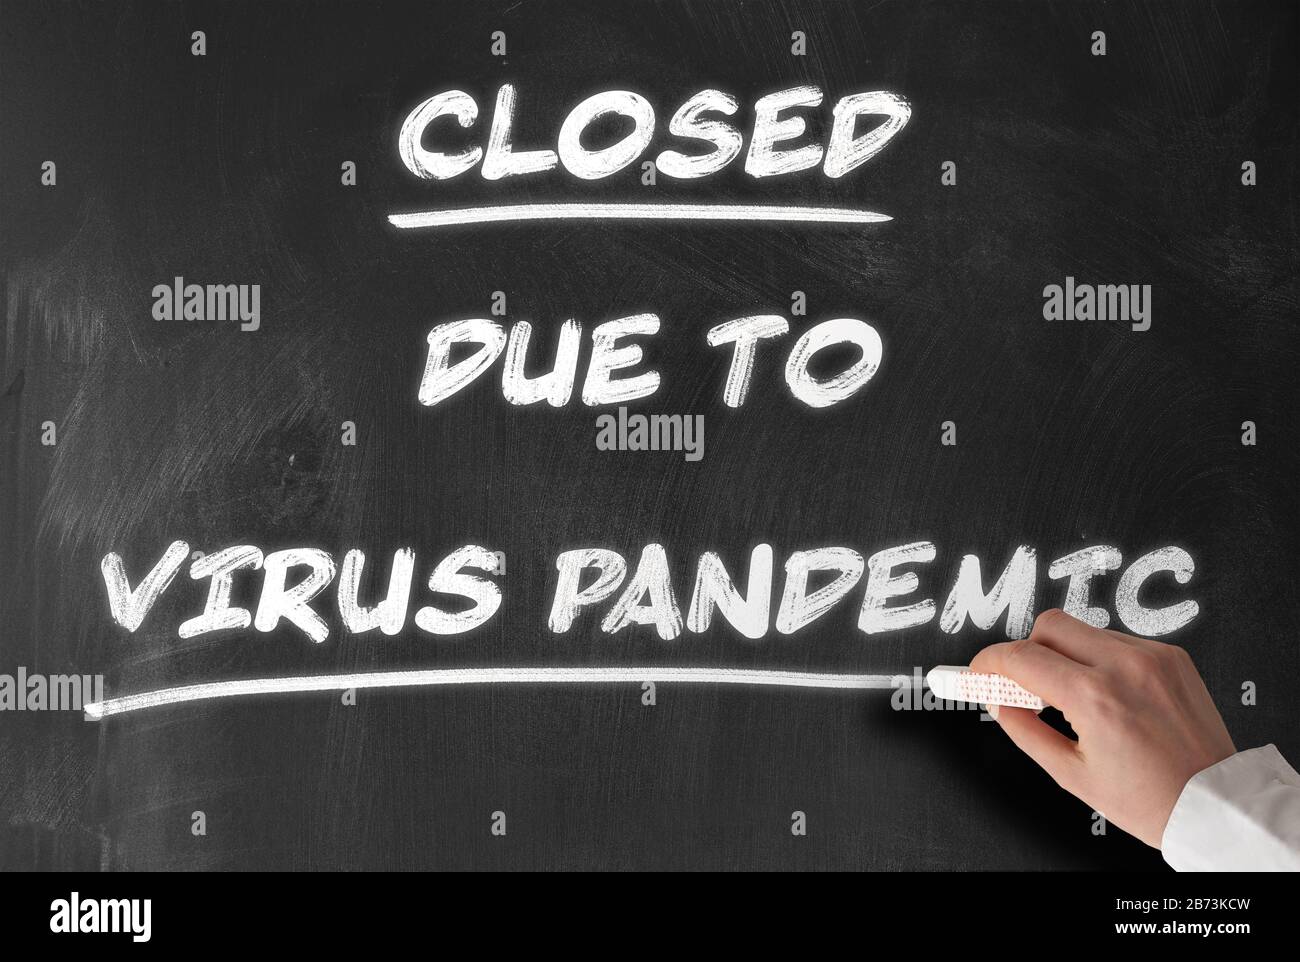 text CLOSED DUE TO VIRUS PANDEMIC written on chalkboard, closed schools and business during corona outbreak concept Stock Photo